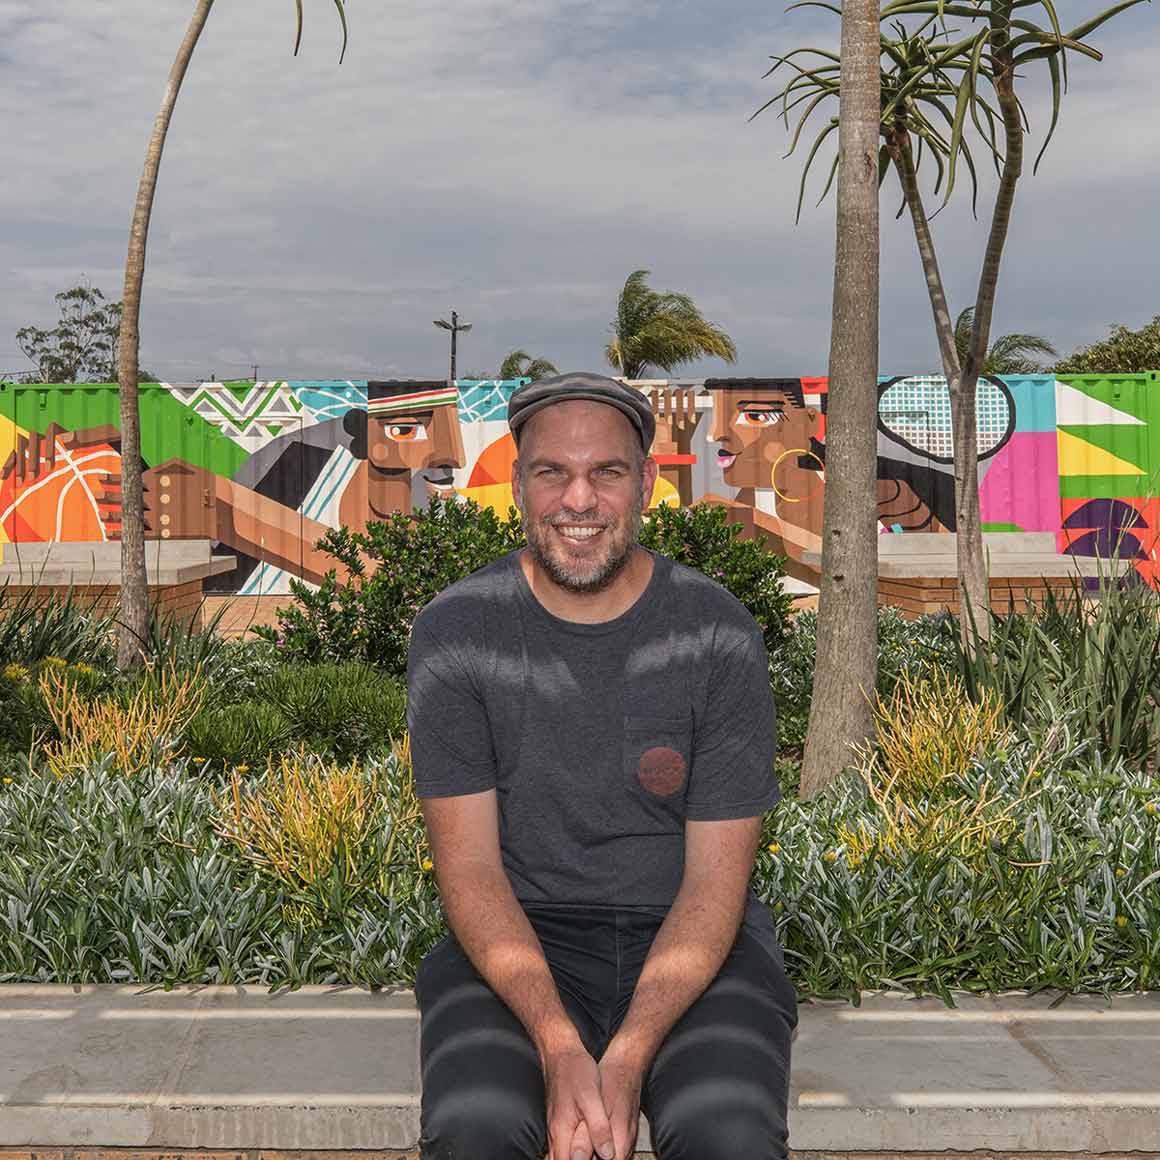 A photo of Wesley van Eden in front of a mural surrounded by palm trees.